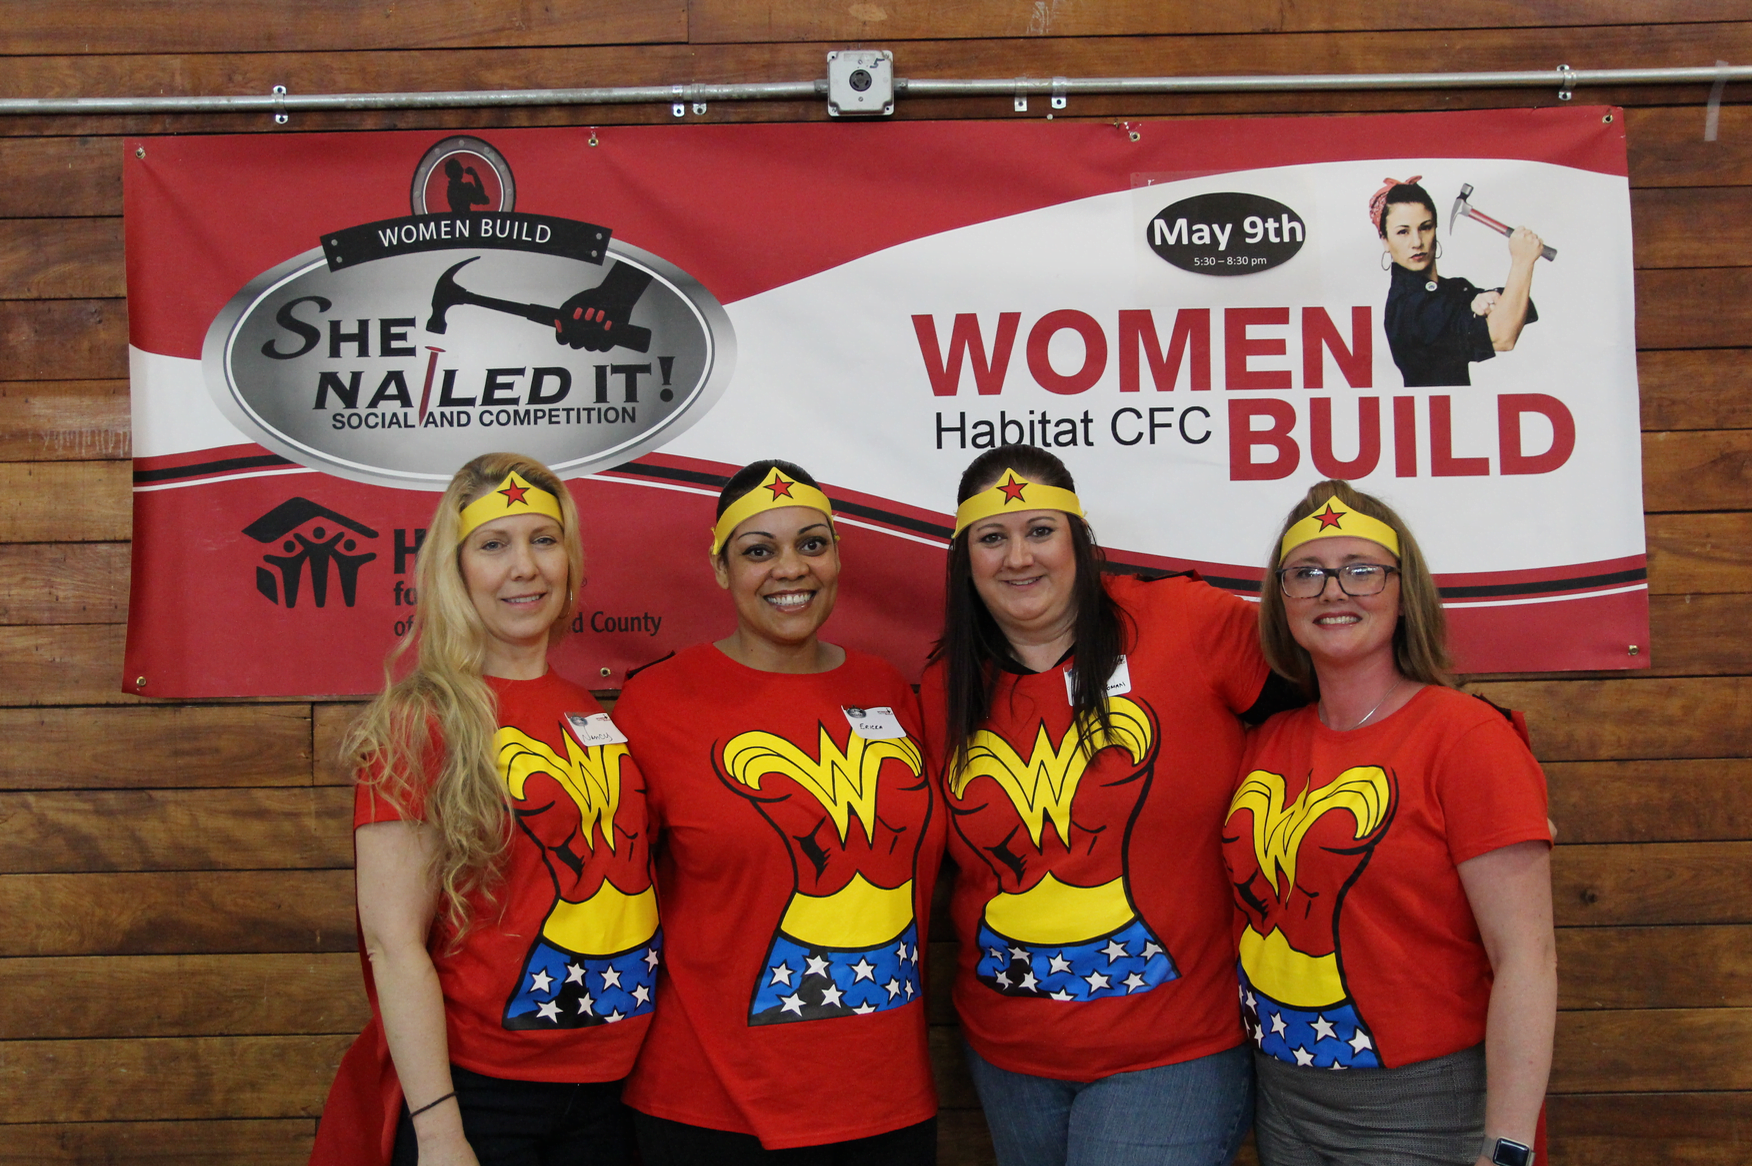 Nancy March, Erica Lyons, Dee Ahern and Tricia Zawel, a team from UPS out of Waterbury at the She Nailed It fundraiser at Eastern Greenwich Civic Center. May 9, 2018